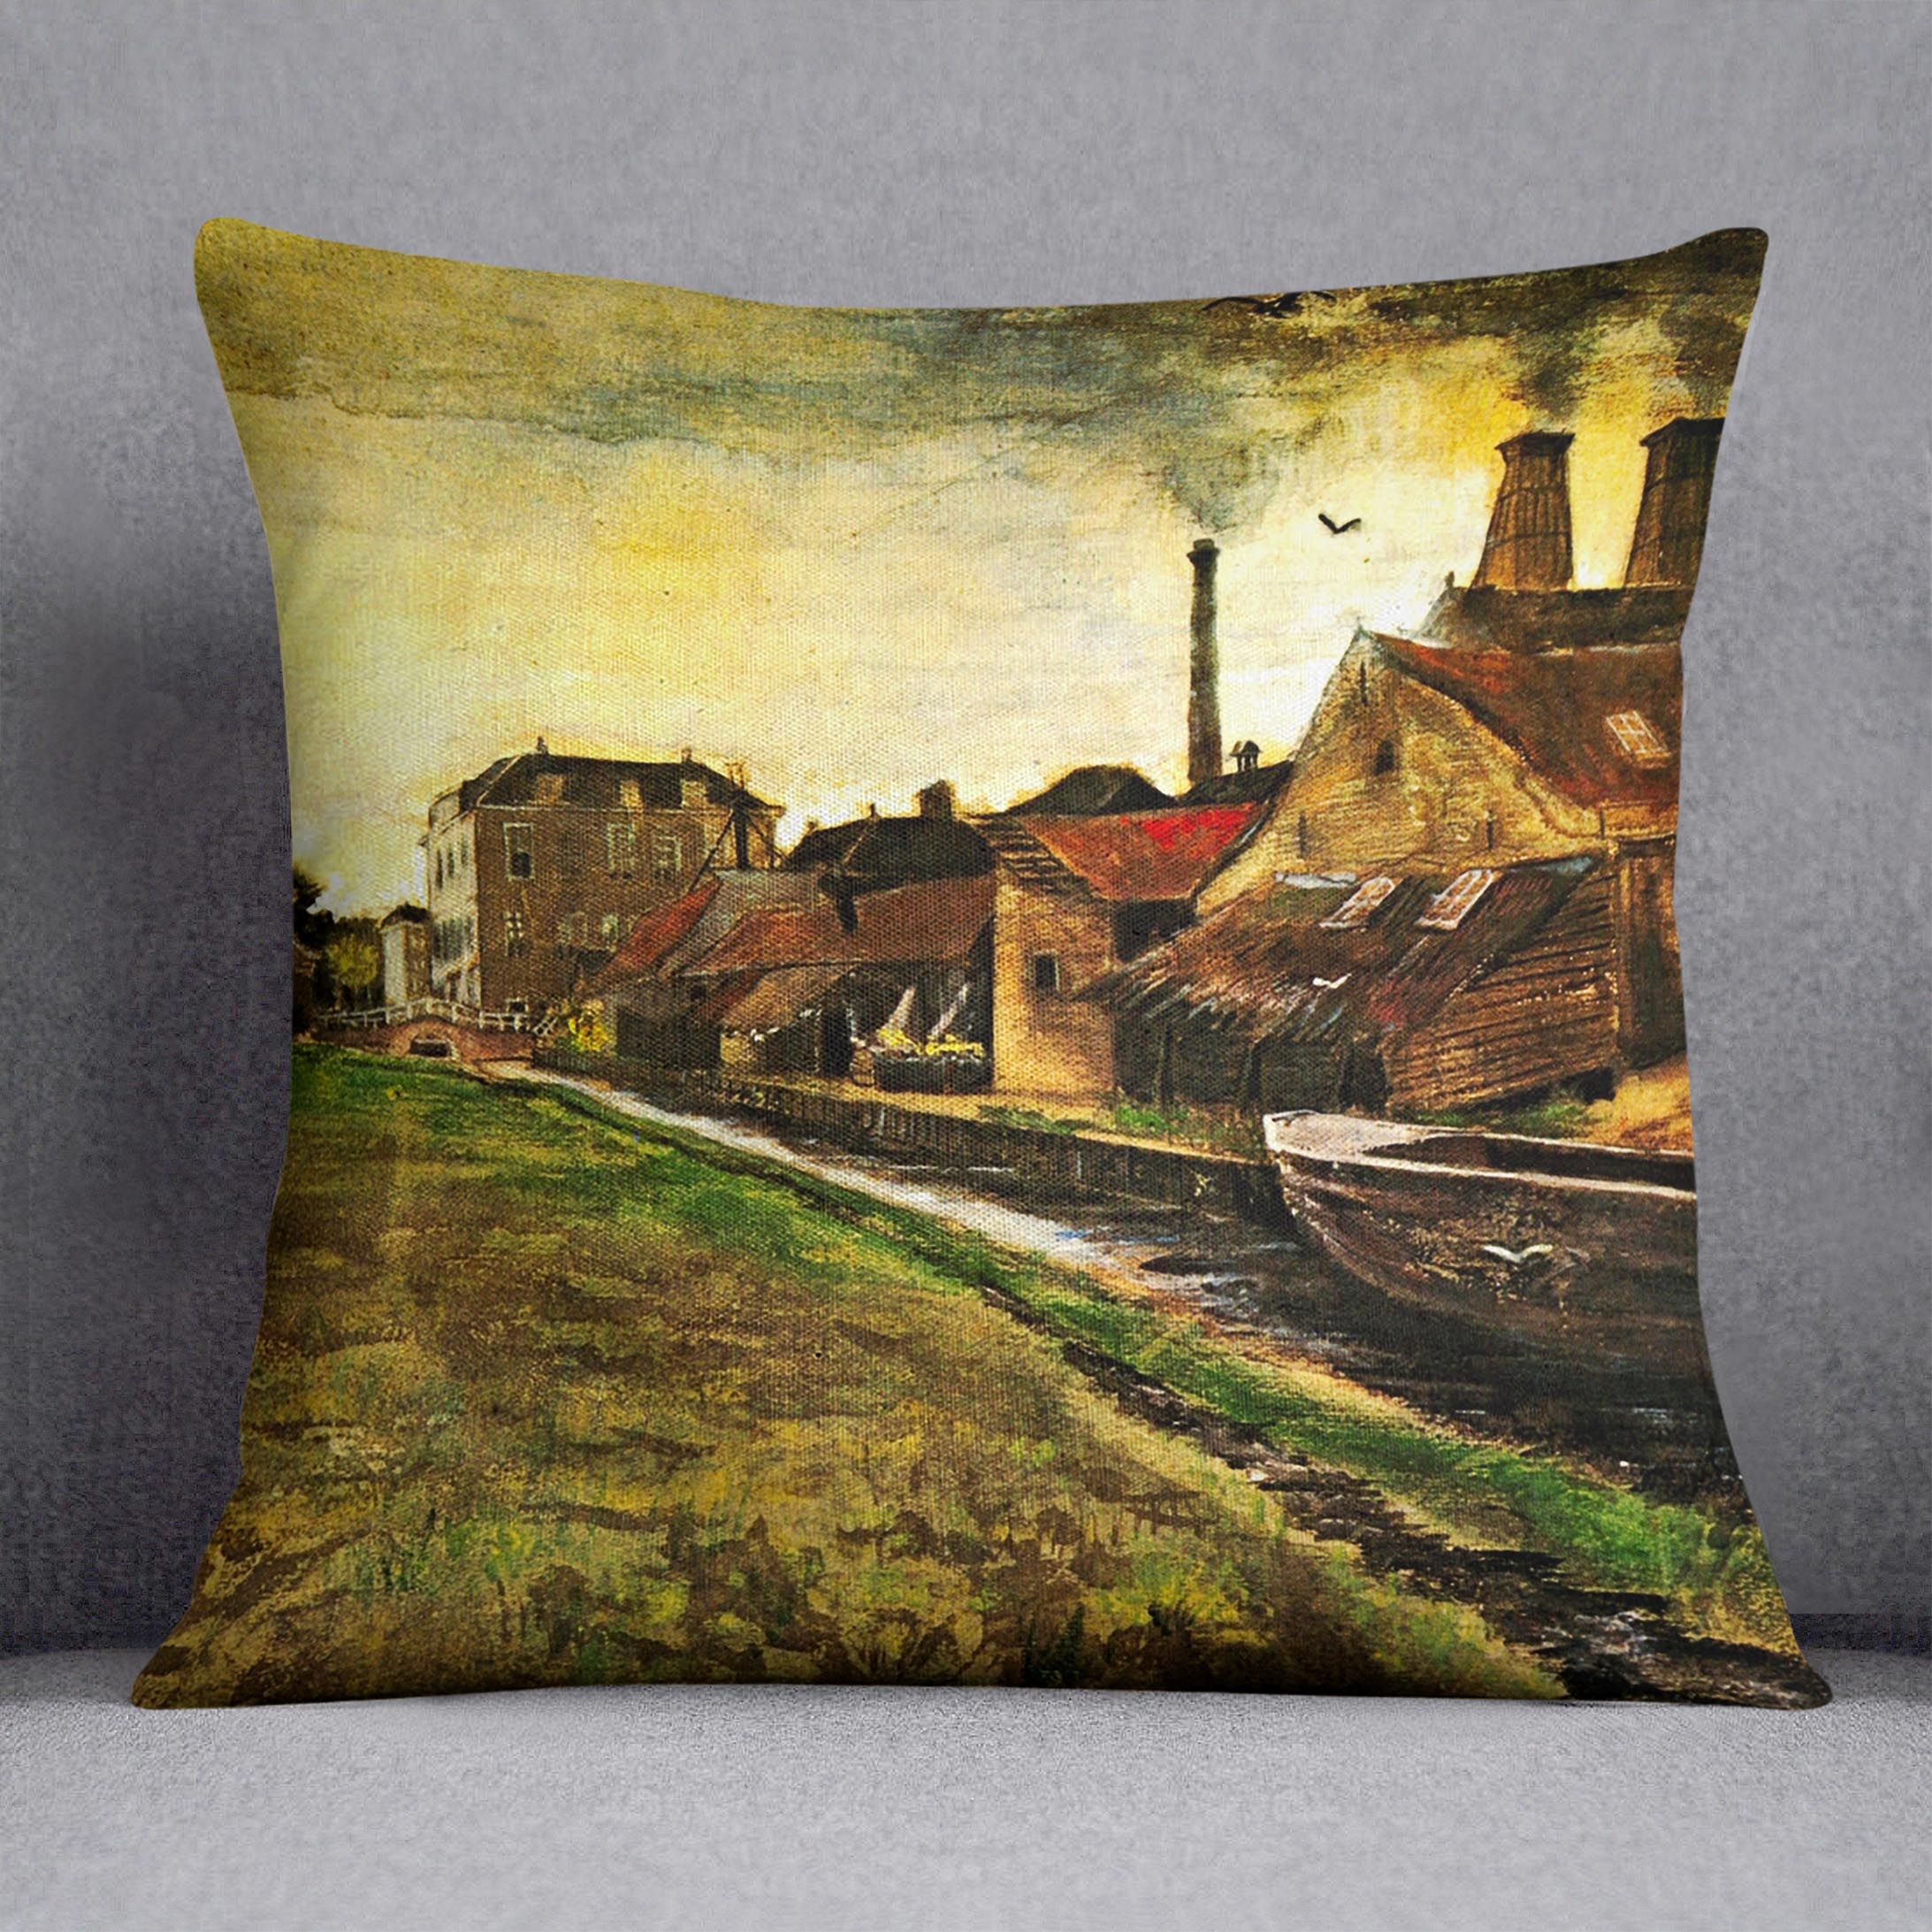 Iron Mill in The Hague by Van Gogh Cushion